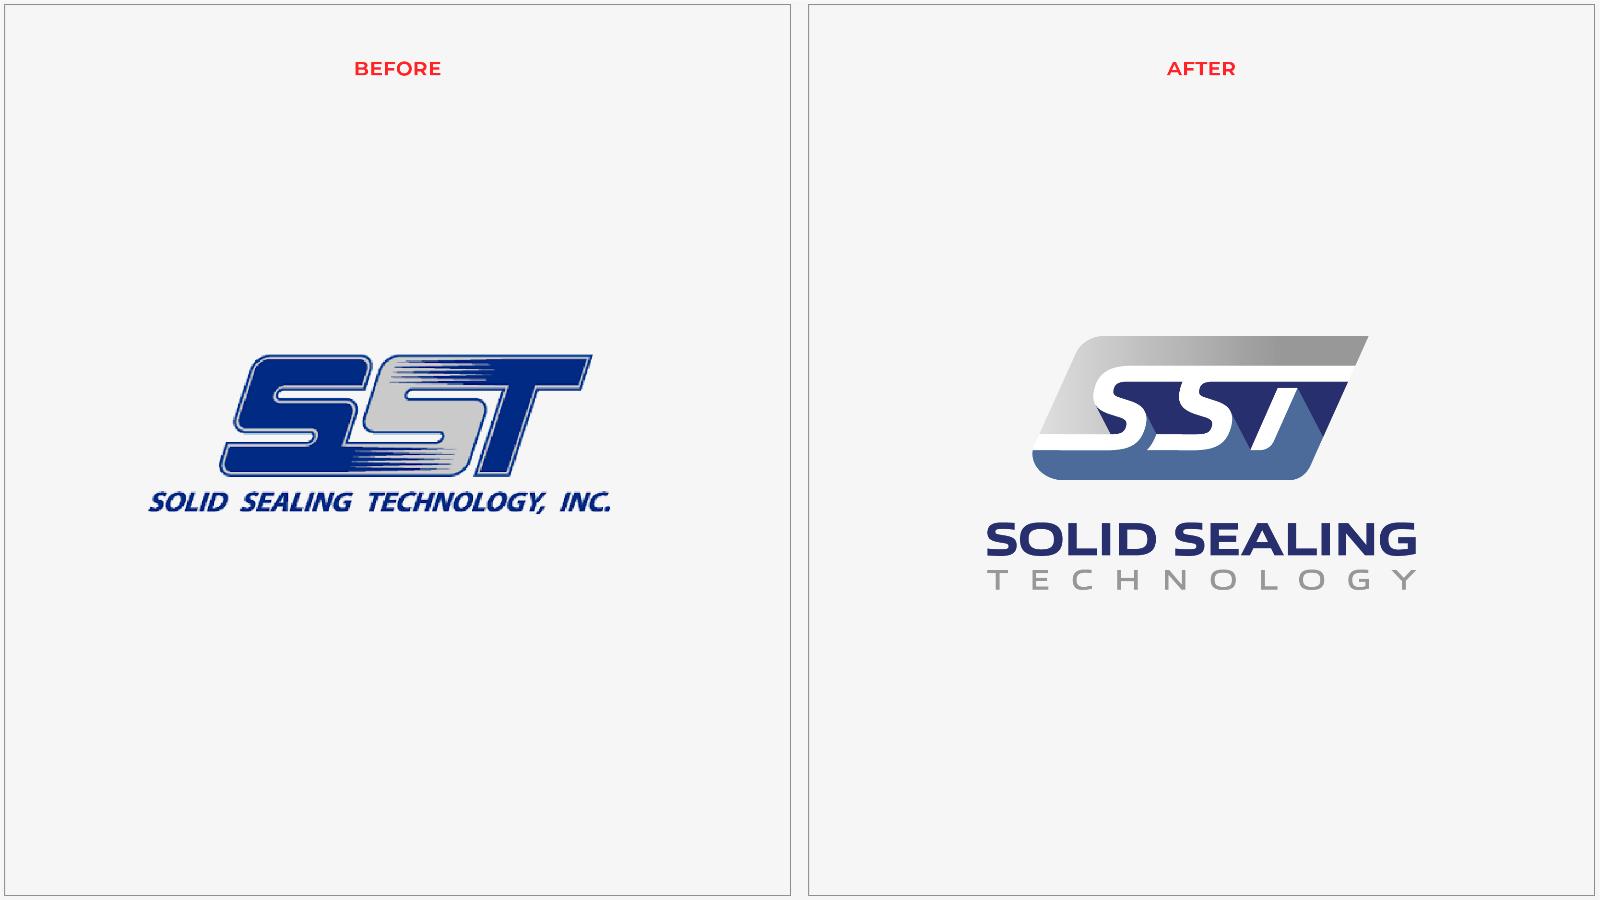 Solid Sealing Technology | Before and after logos